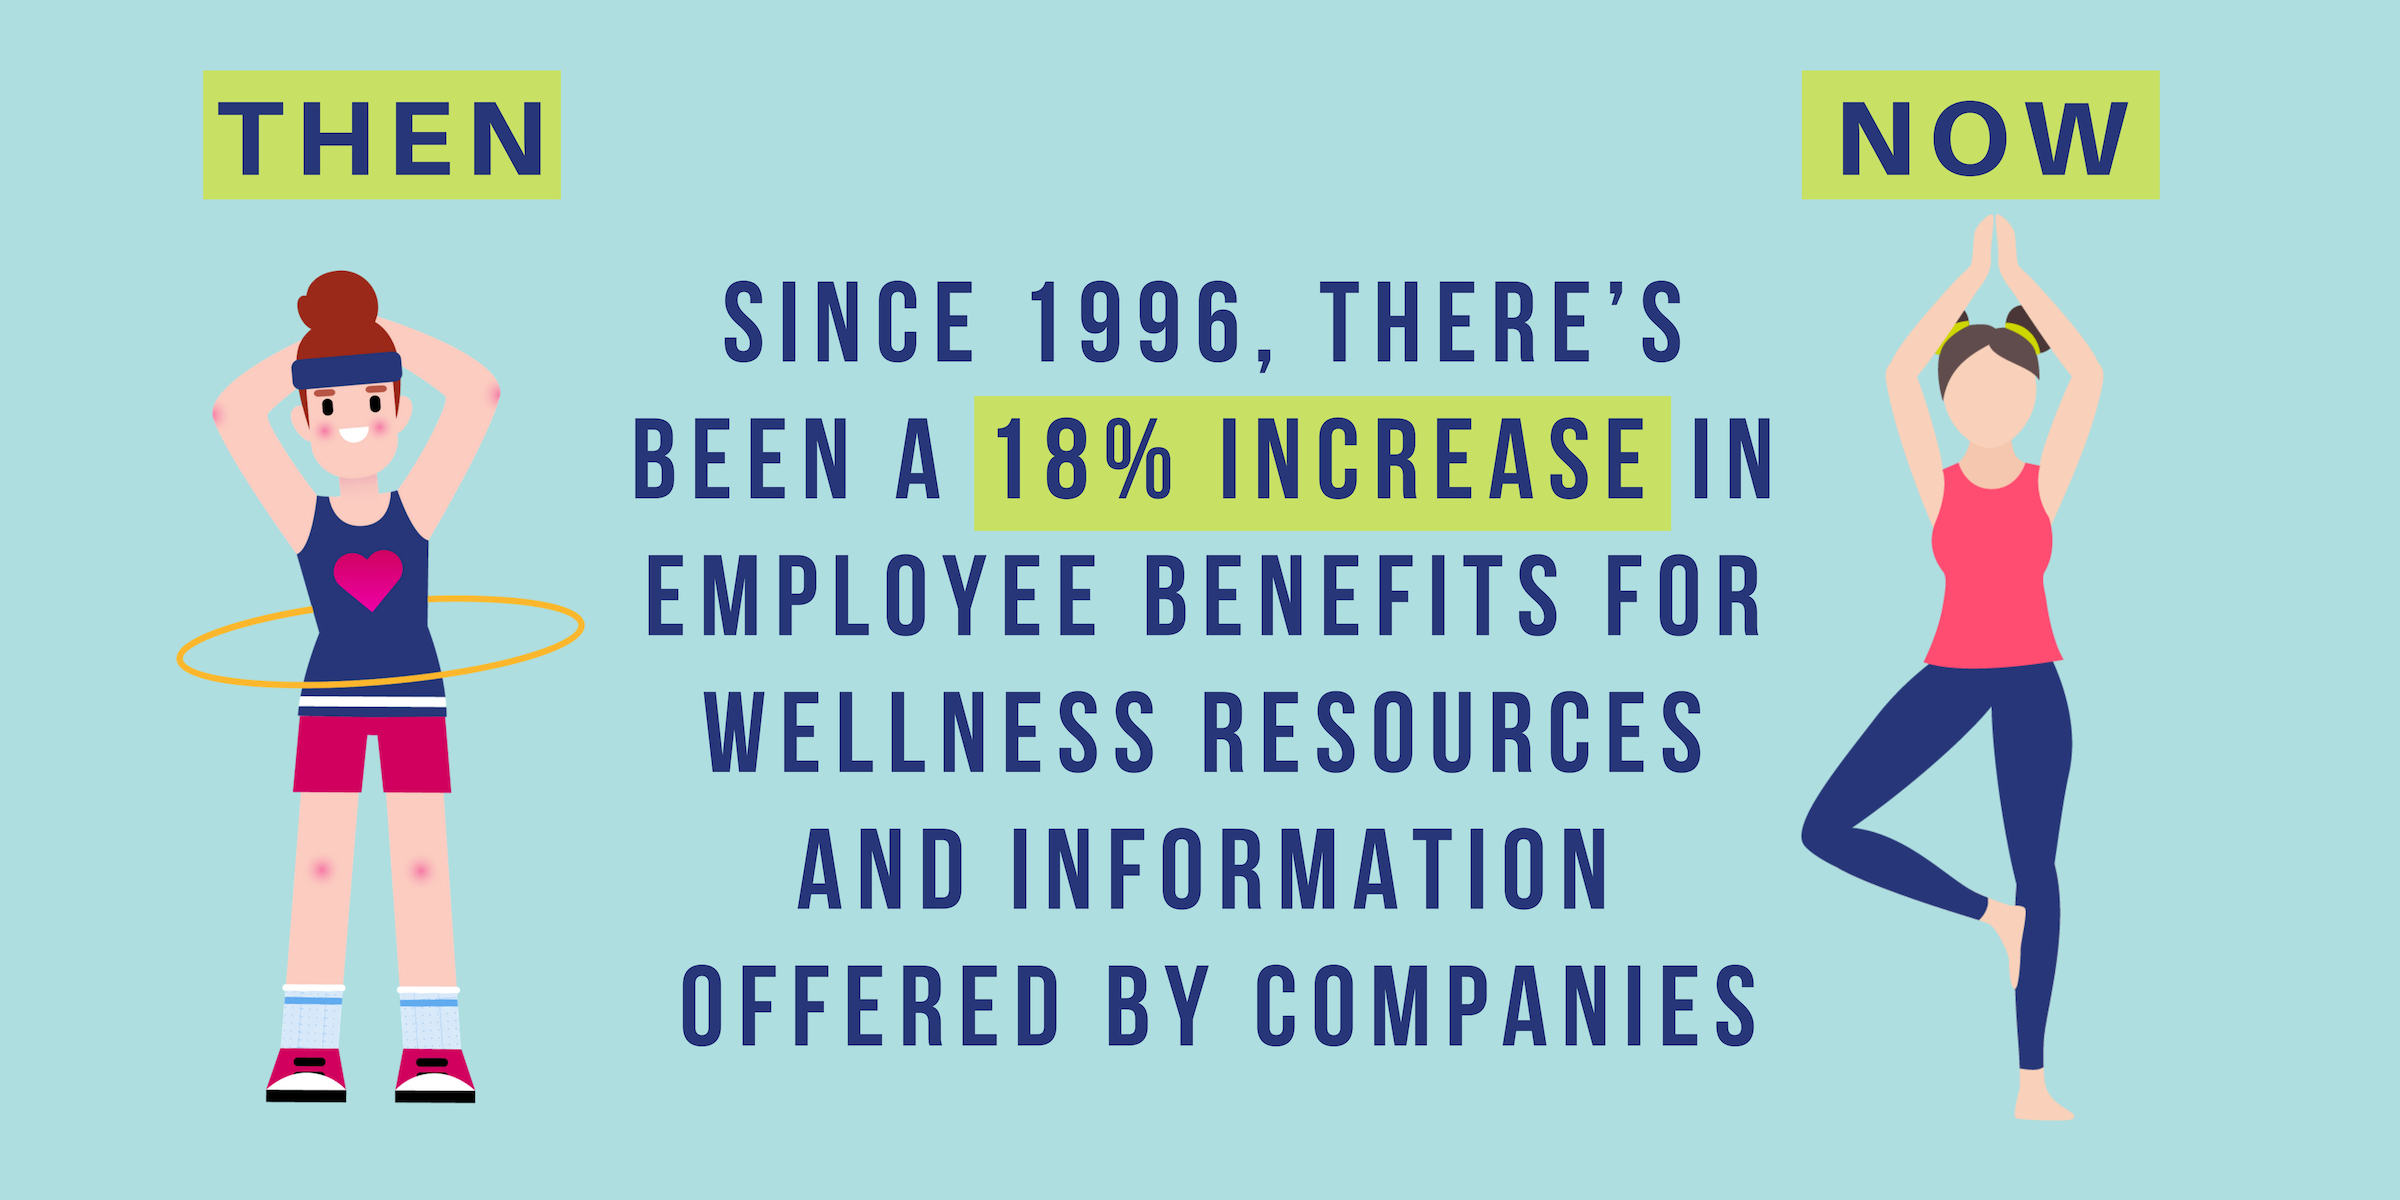 Since 1996, there's been a 18% increase in employee benefits for wellness resources and information offered by companies